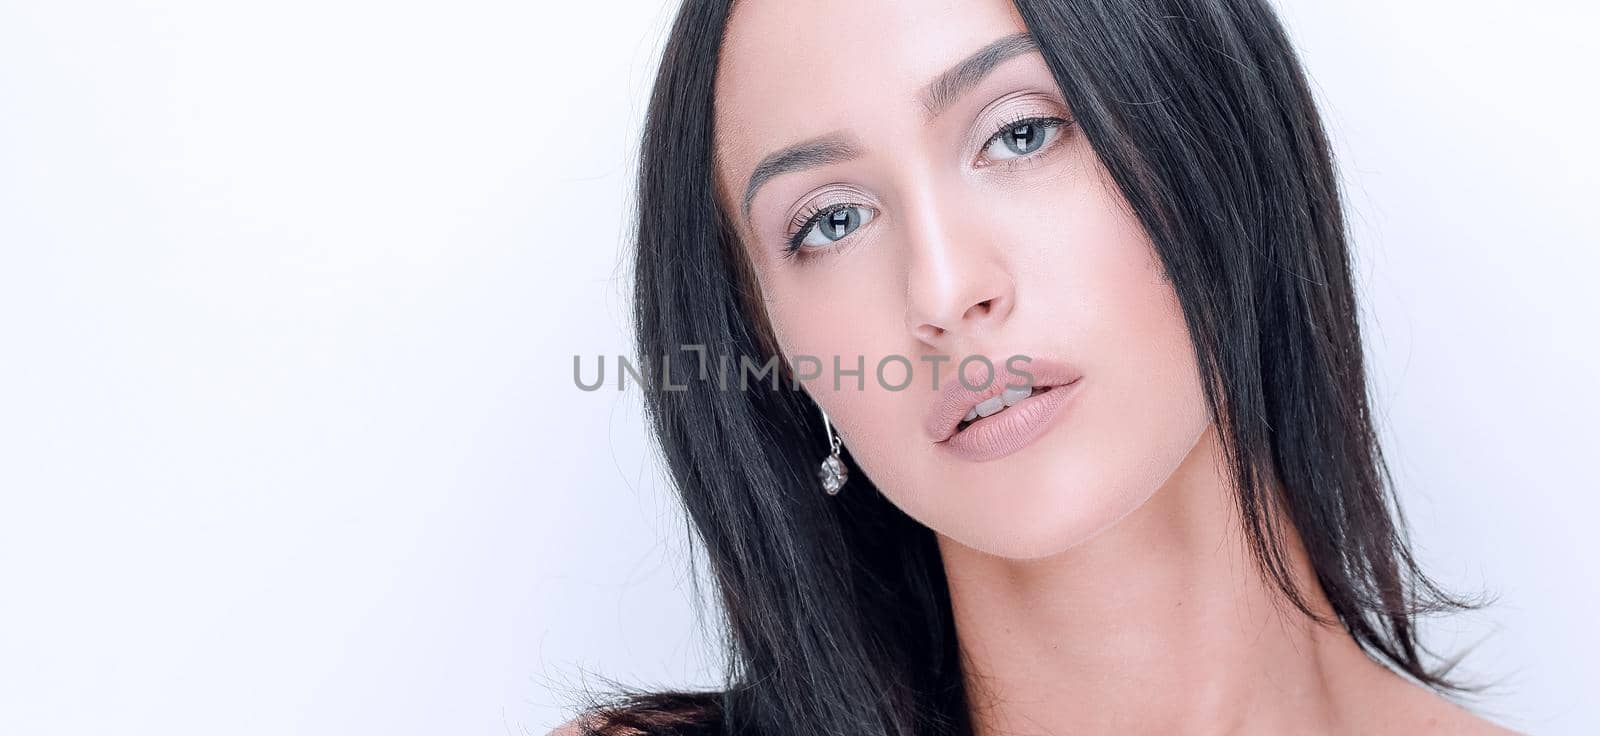 Young woman close up face beauty portrait by asdf